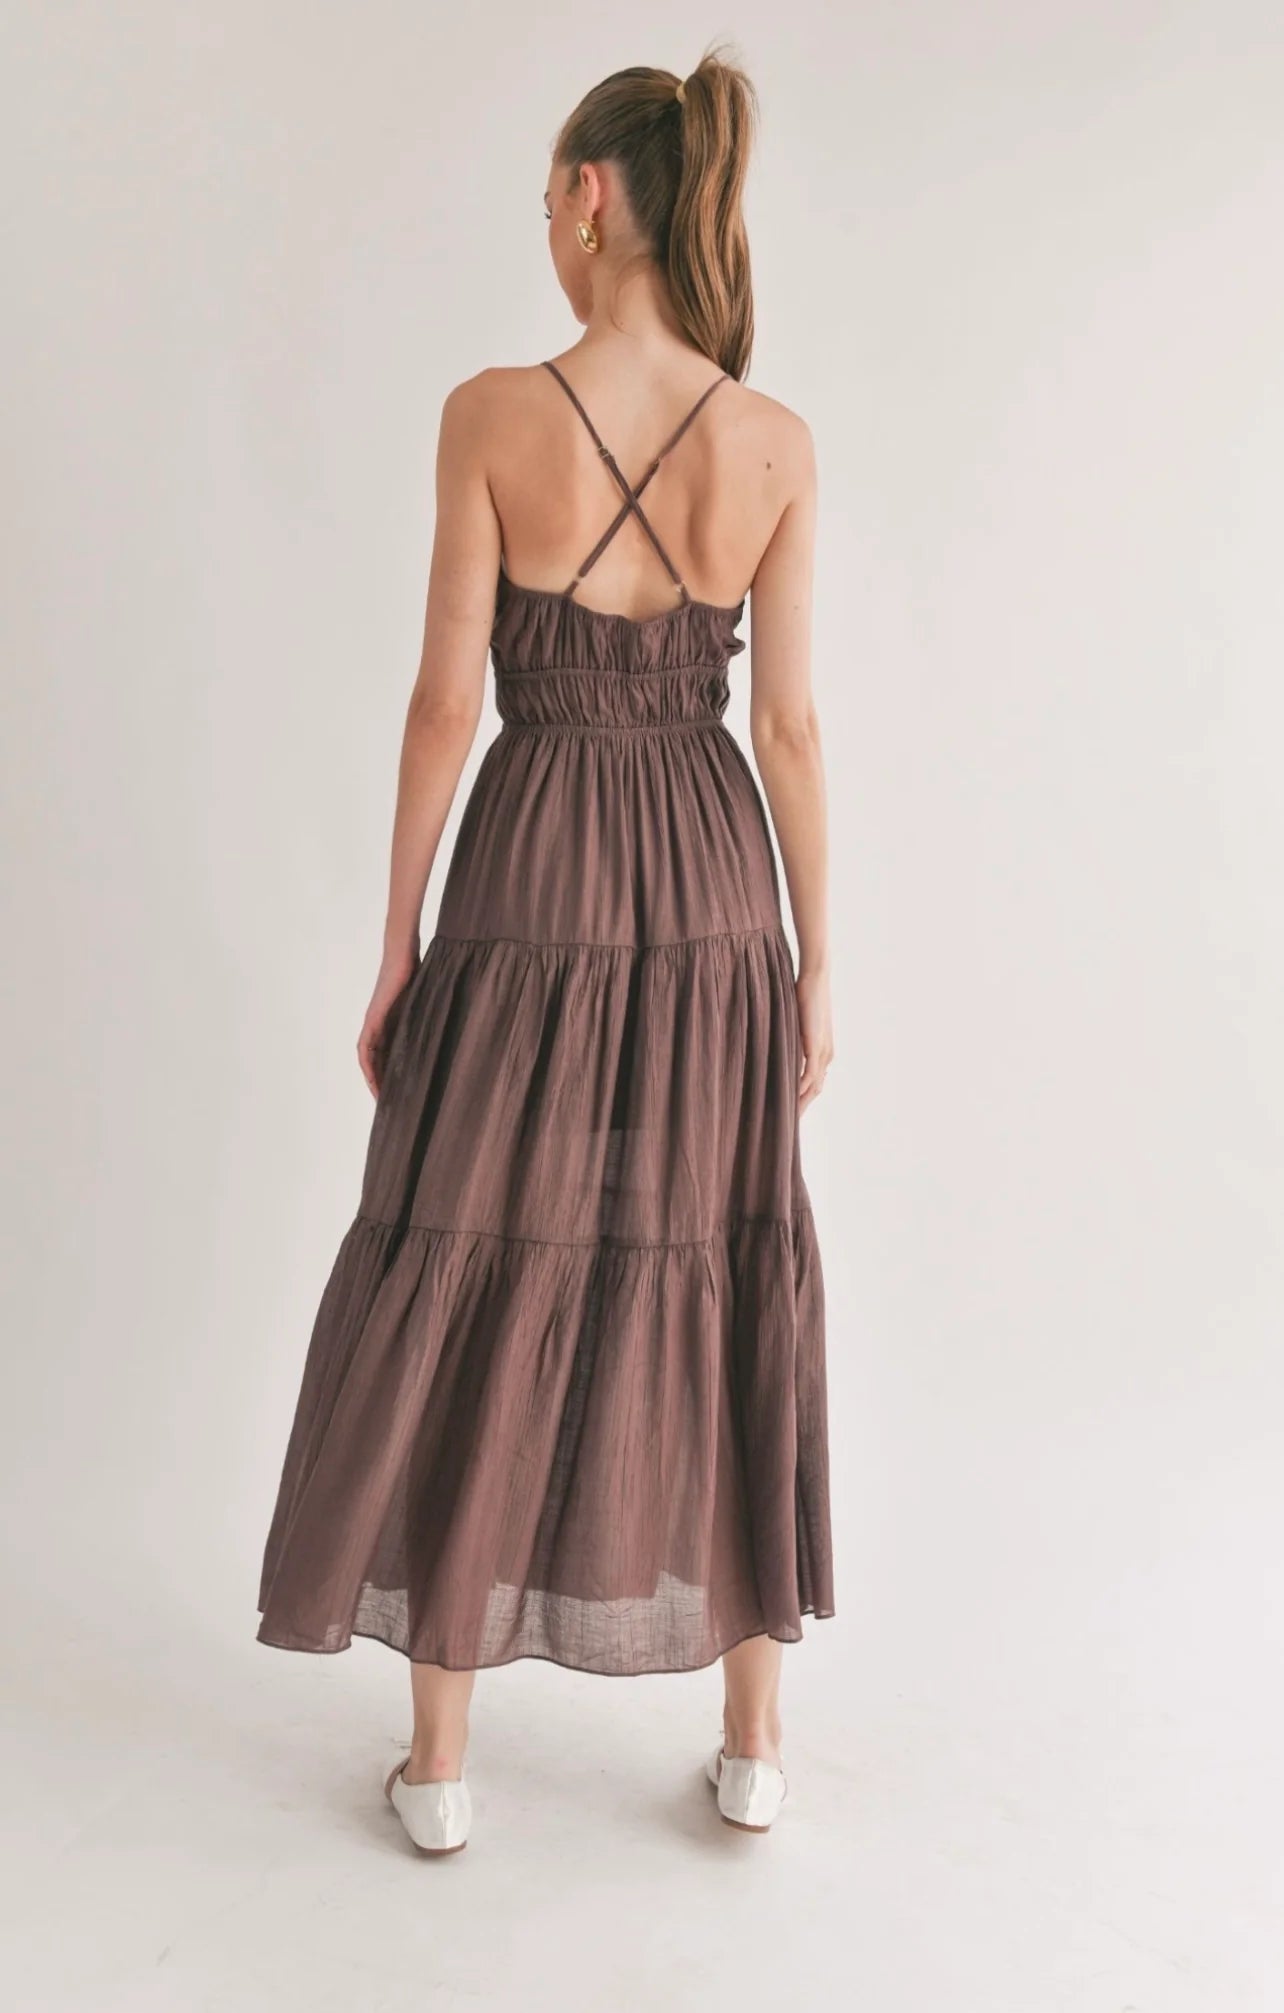 Sage the Label Light a Fire Maxi Dress - Chocolate Brown